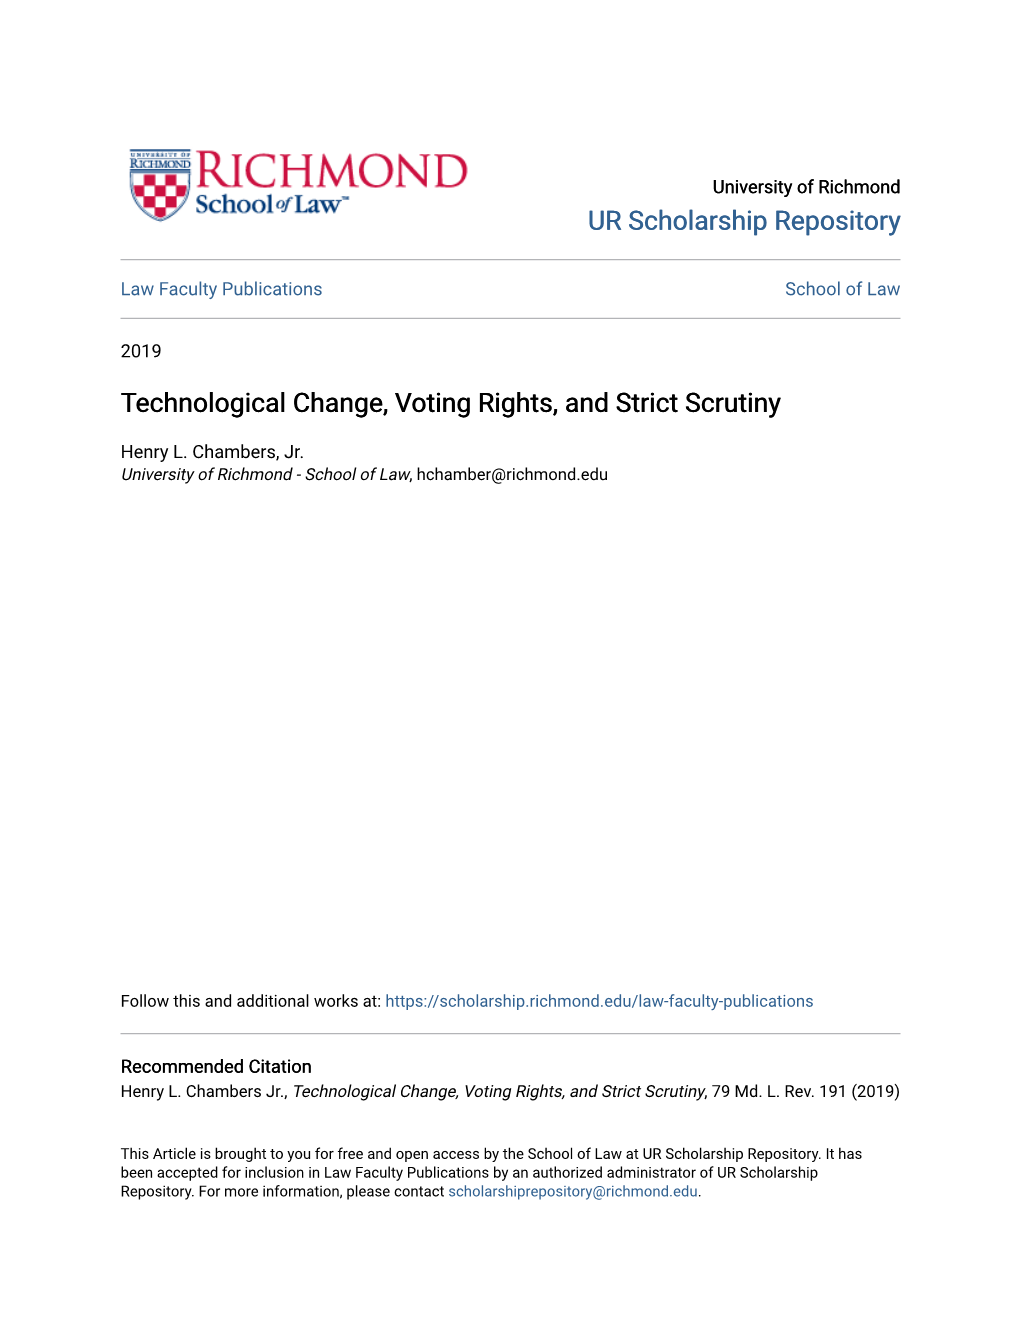 Technological Change, Voting Rights, and Strict Scrutiny